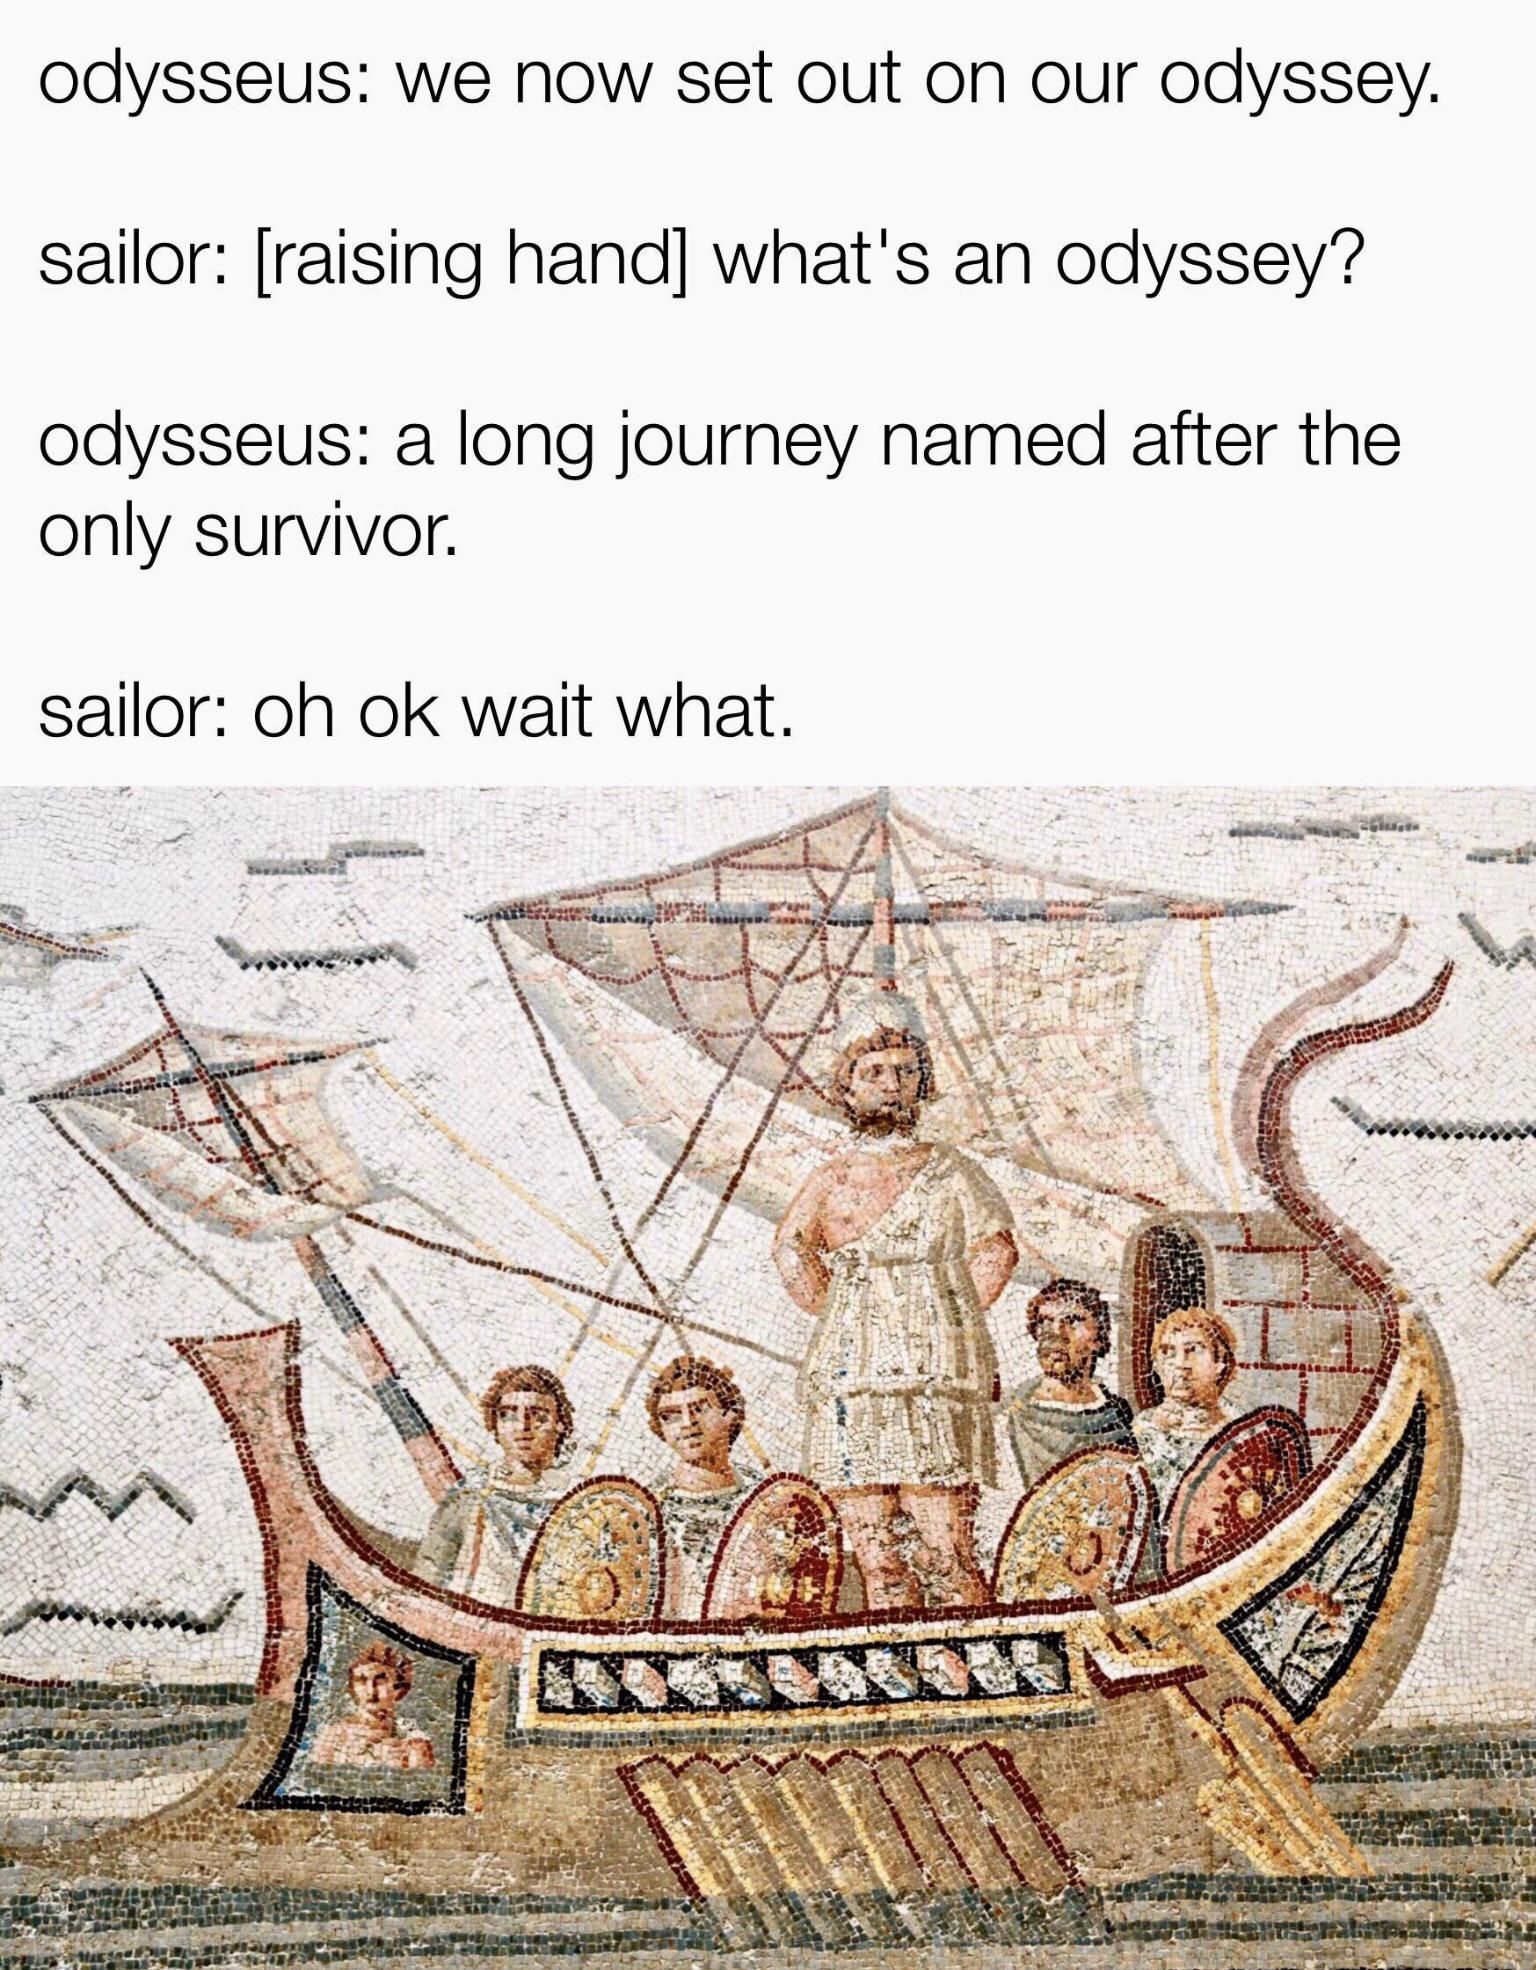 what’s an odyssey?